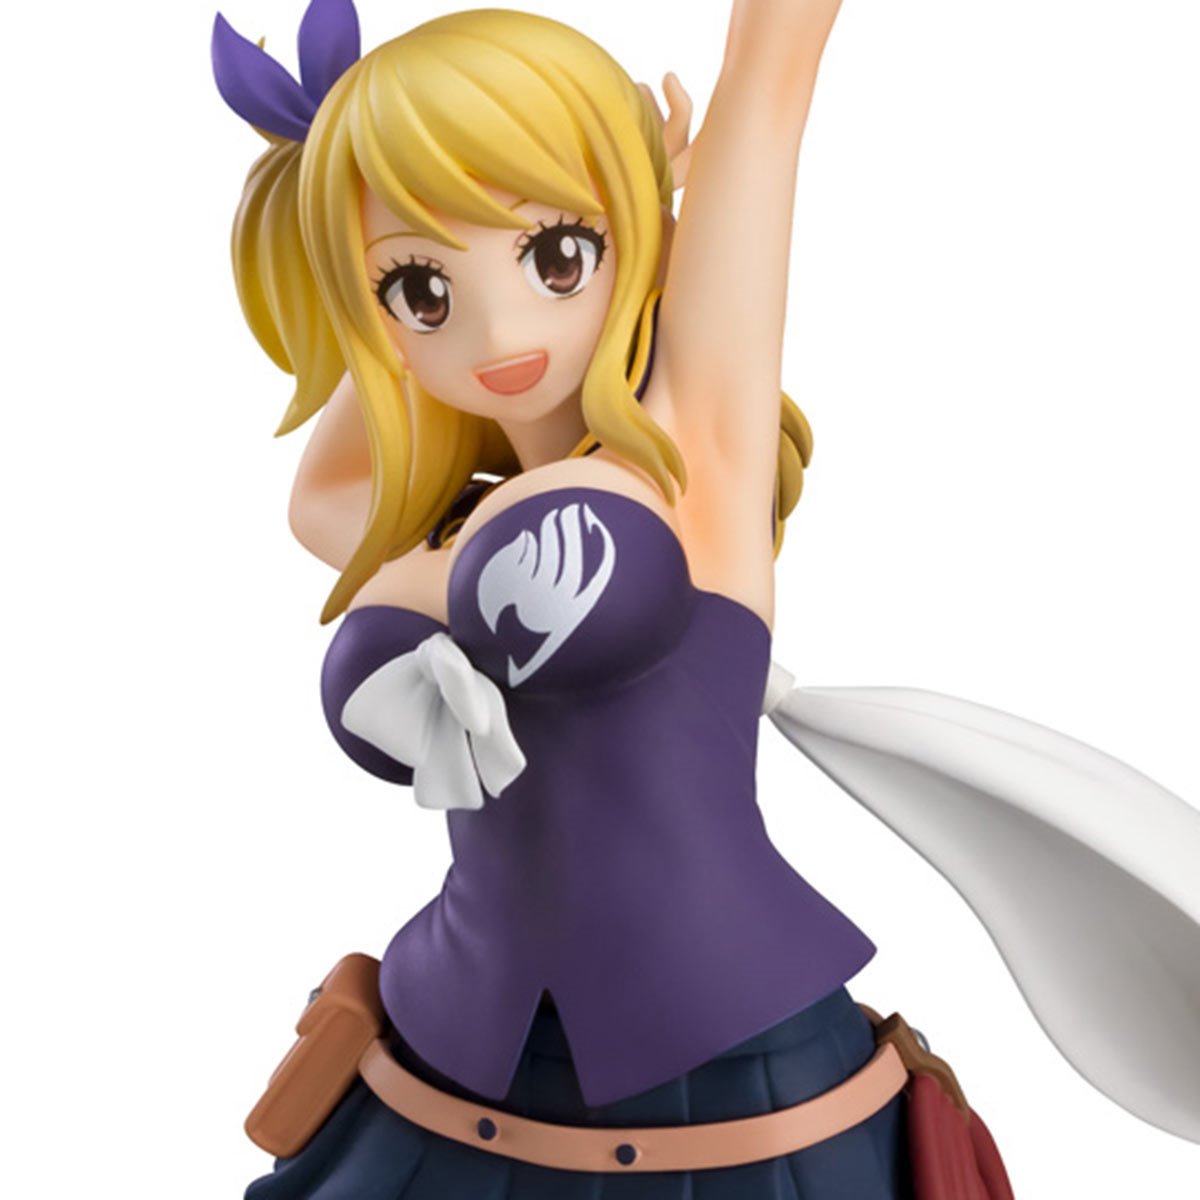 Manga-Mafia.de - COLLECTOR - Fairy Tail - Lucy Heartfilia - Grand Magic  Royale Ver. - Pop Up Parade - 17 cm PVC Statue - All products - Your Anime  and Manga Online Shop for Manga, Merchandise and more.